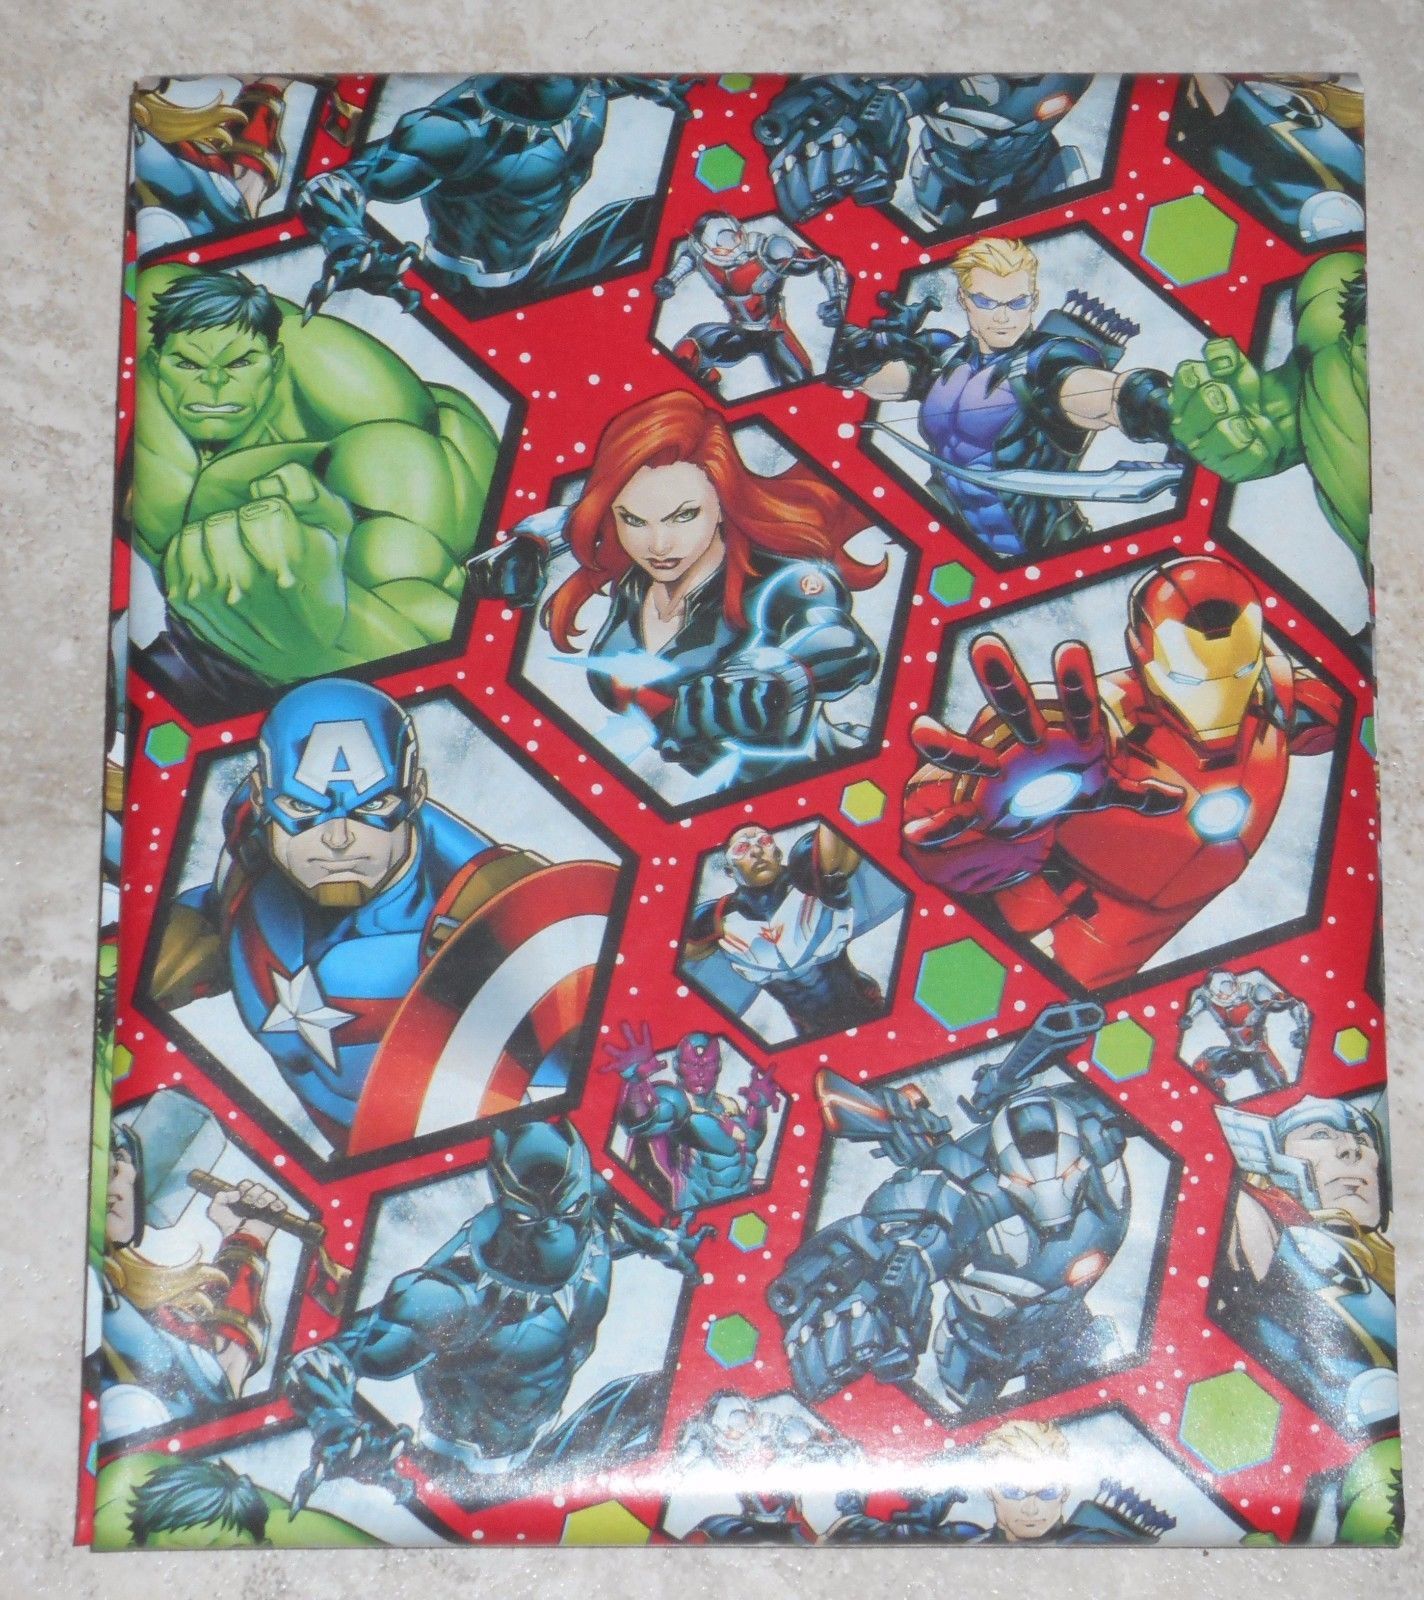 USA MARVEL AVENGERS HULK Christmas Wrapping Paper Red Blue